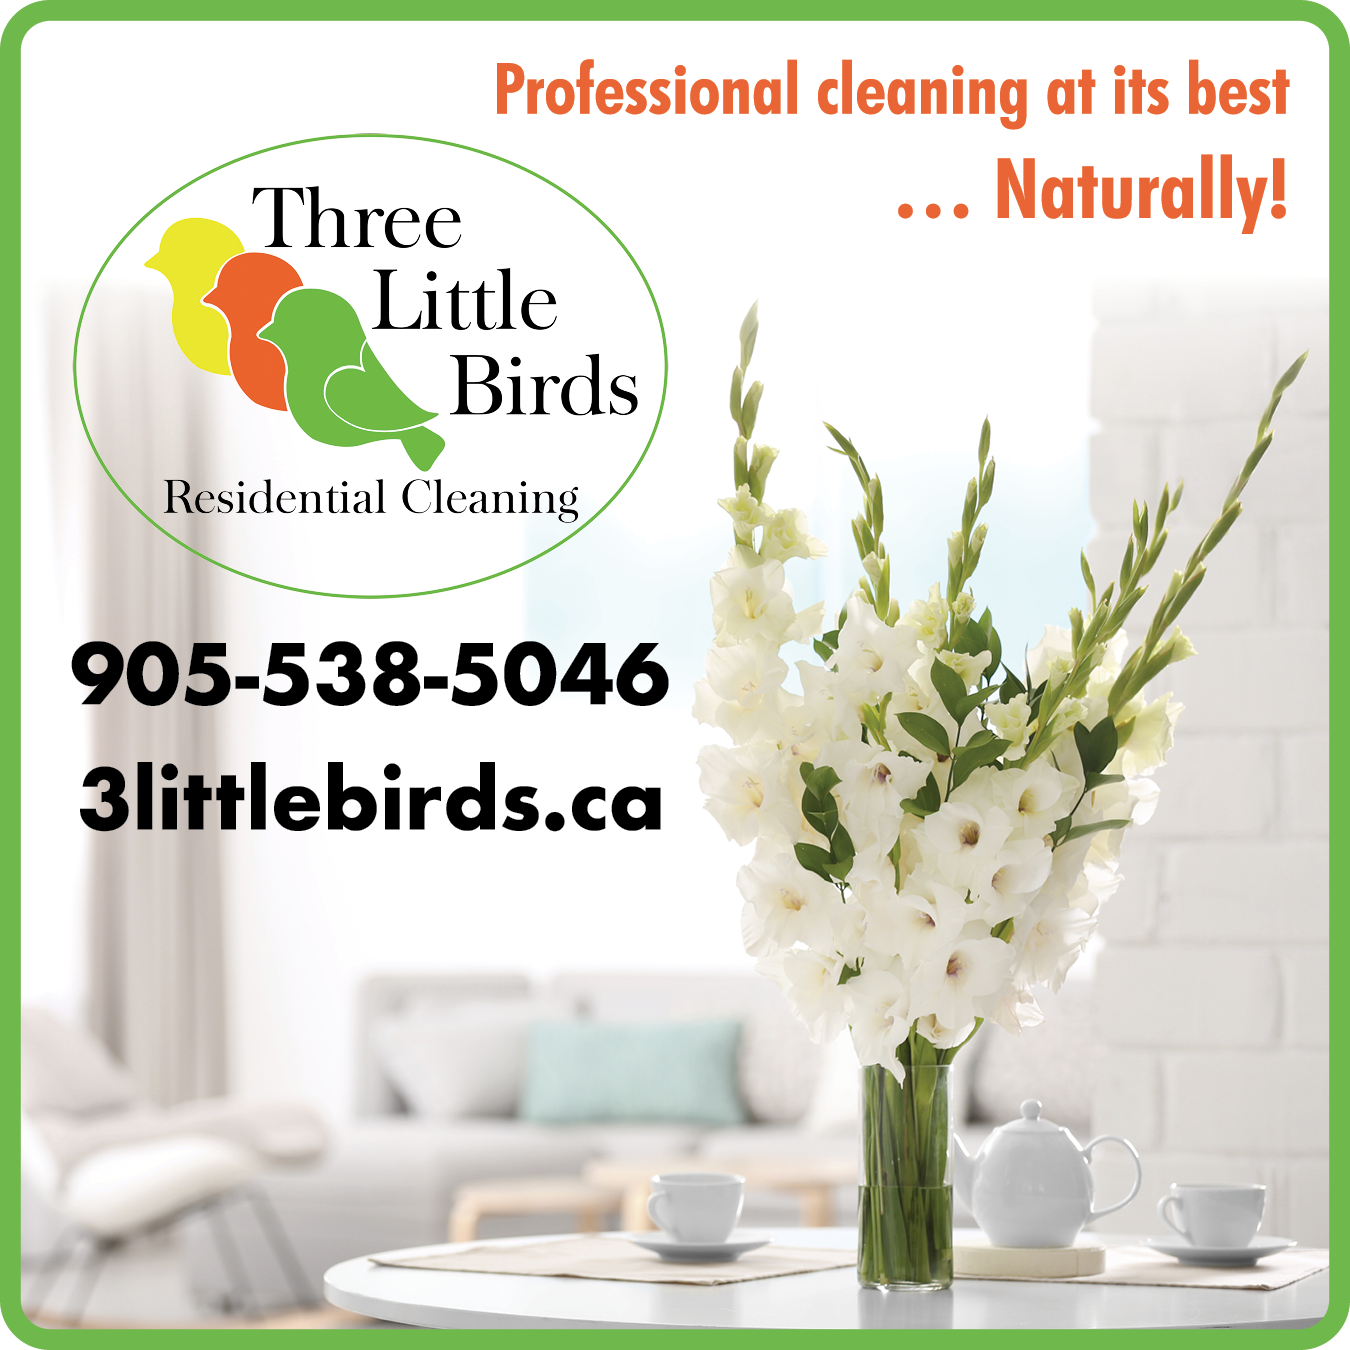 Three Little Birds Residential Cleaning